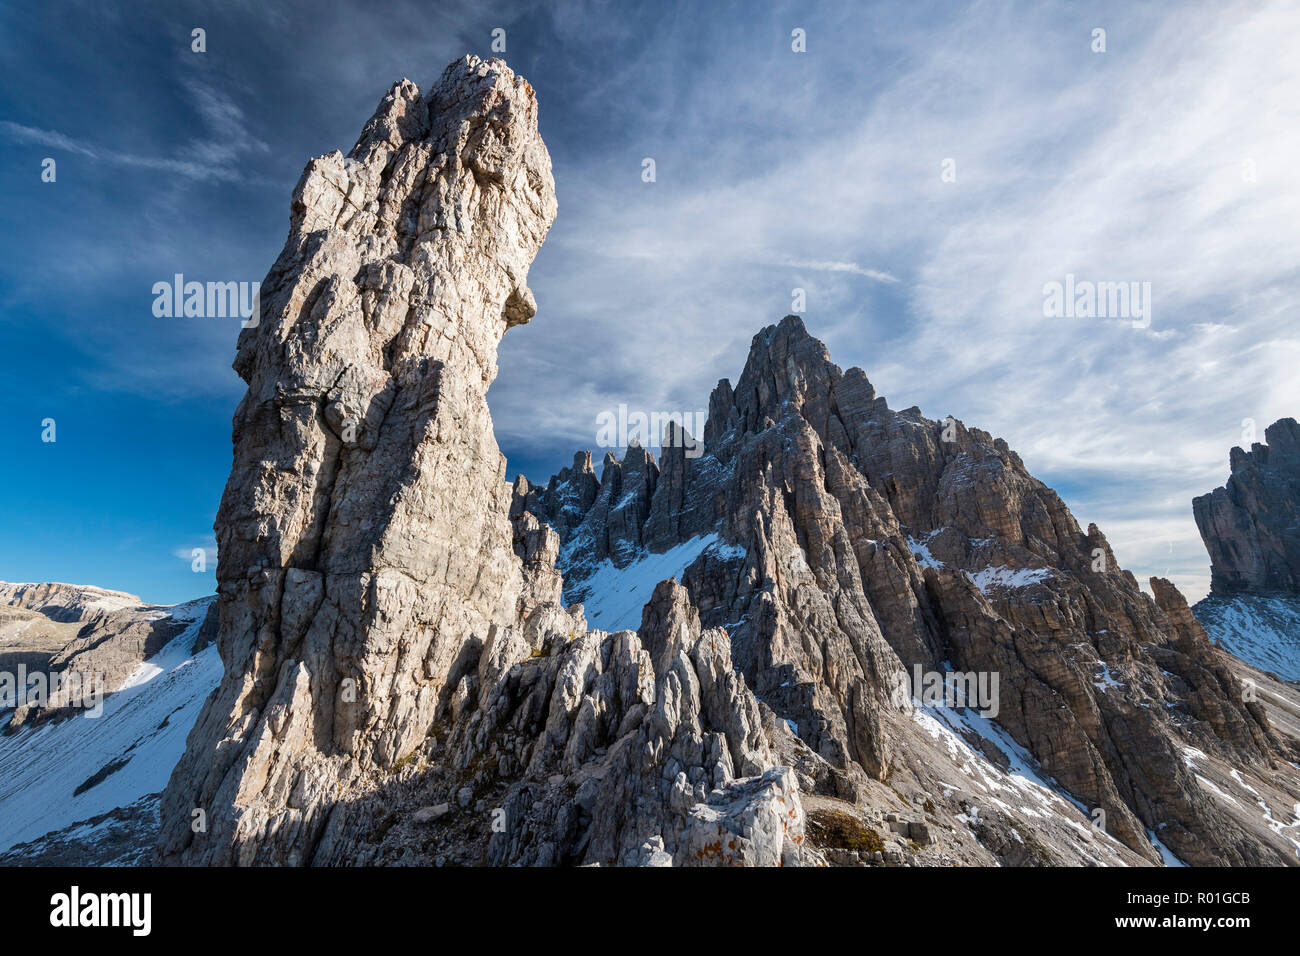 Rock needle and summit of the Paternkofel, Sexten Dolomites, South Tyrol, Trentino-South Tyrol, Italy Stock Photo